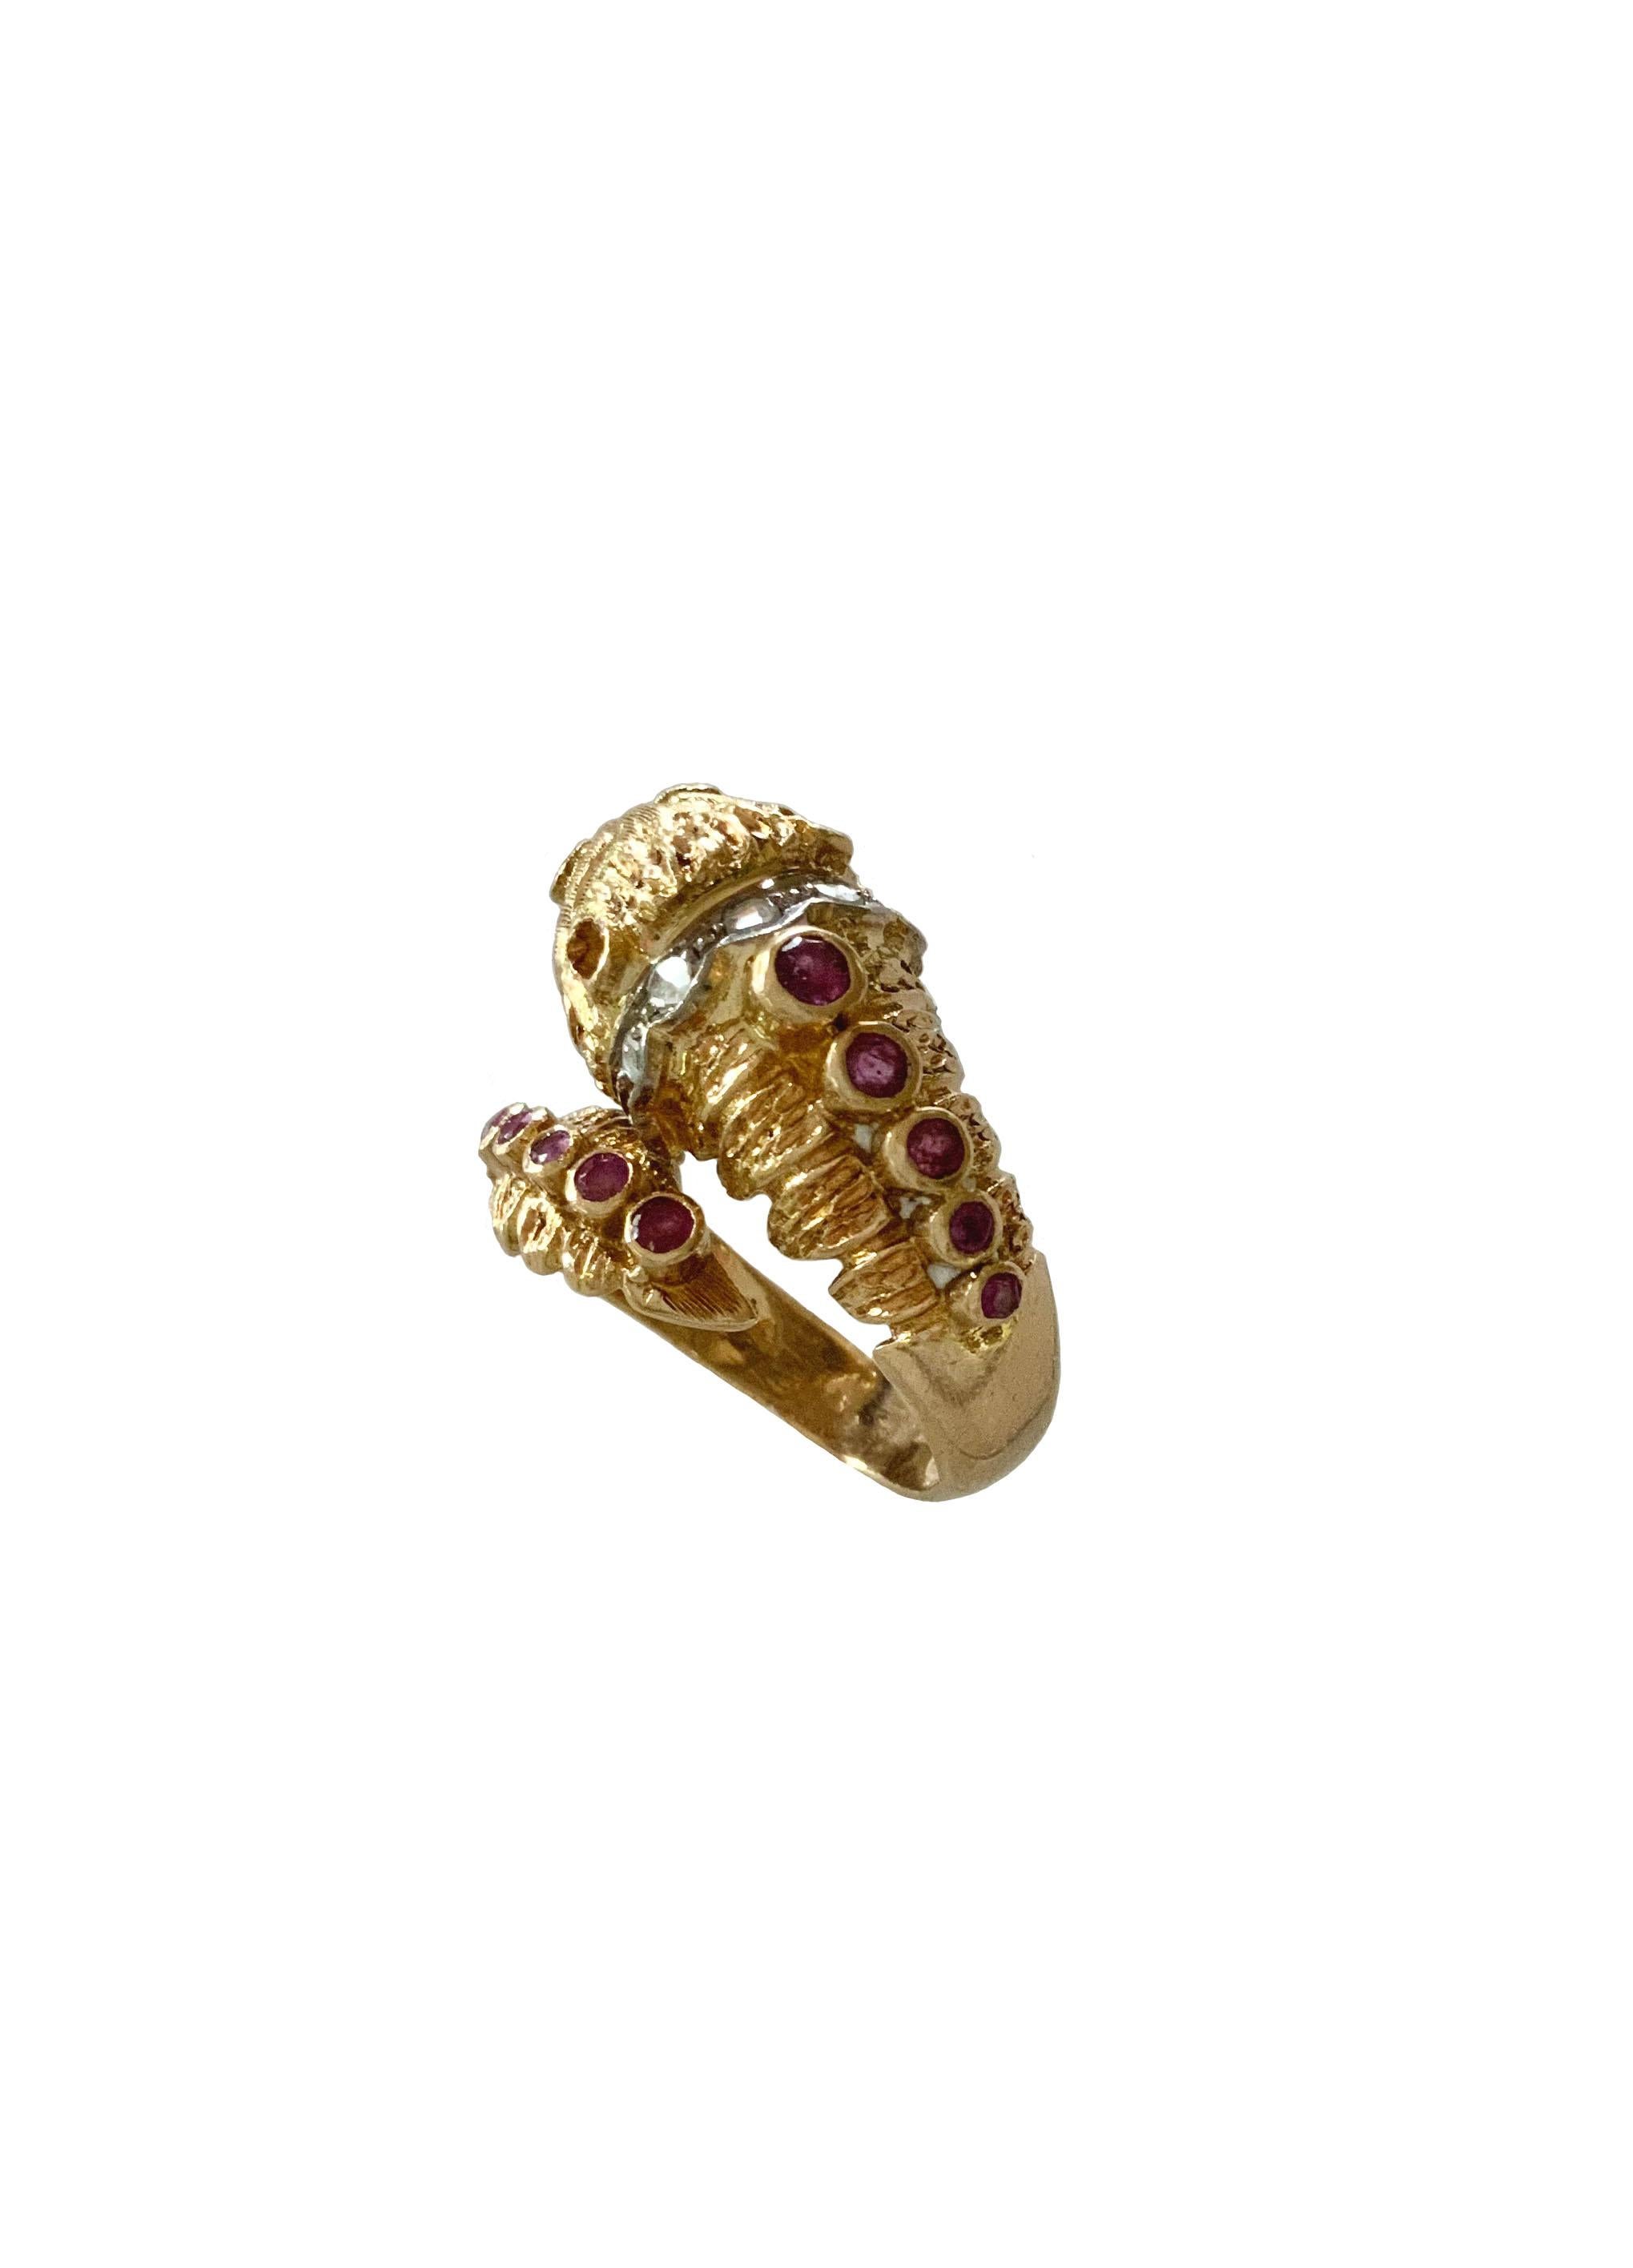 Women's or Men's Ilias Lalaounis Gold Diamond and Ruby Chimera Lion's Head Ring